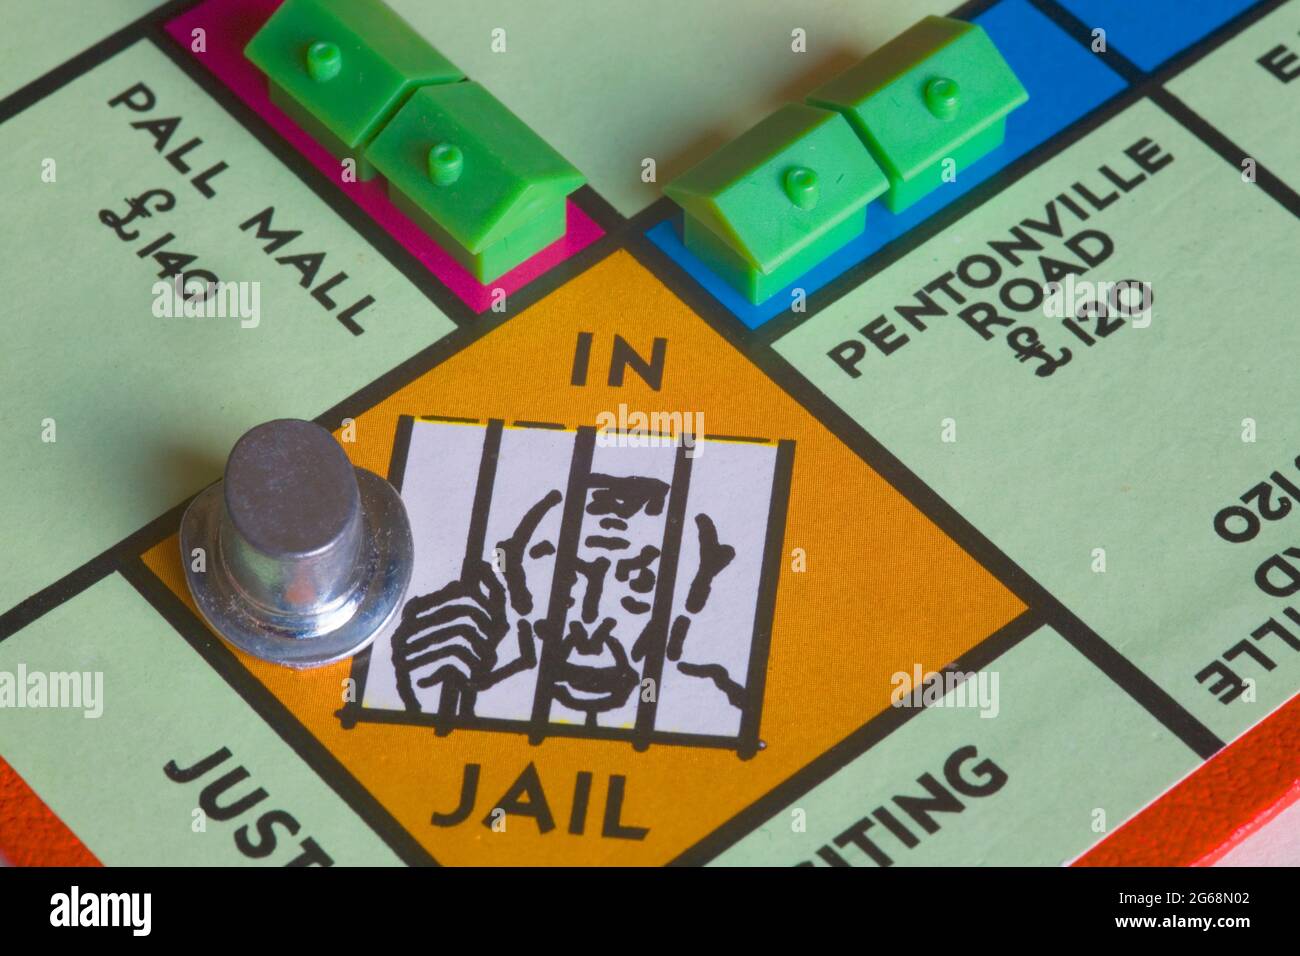 in jail   monopoly board game Stock Photo